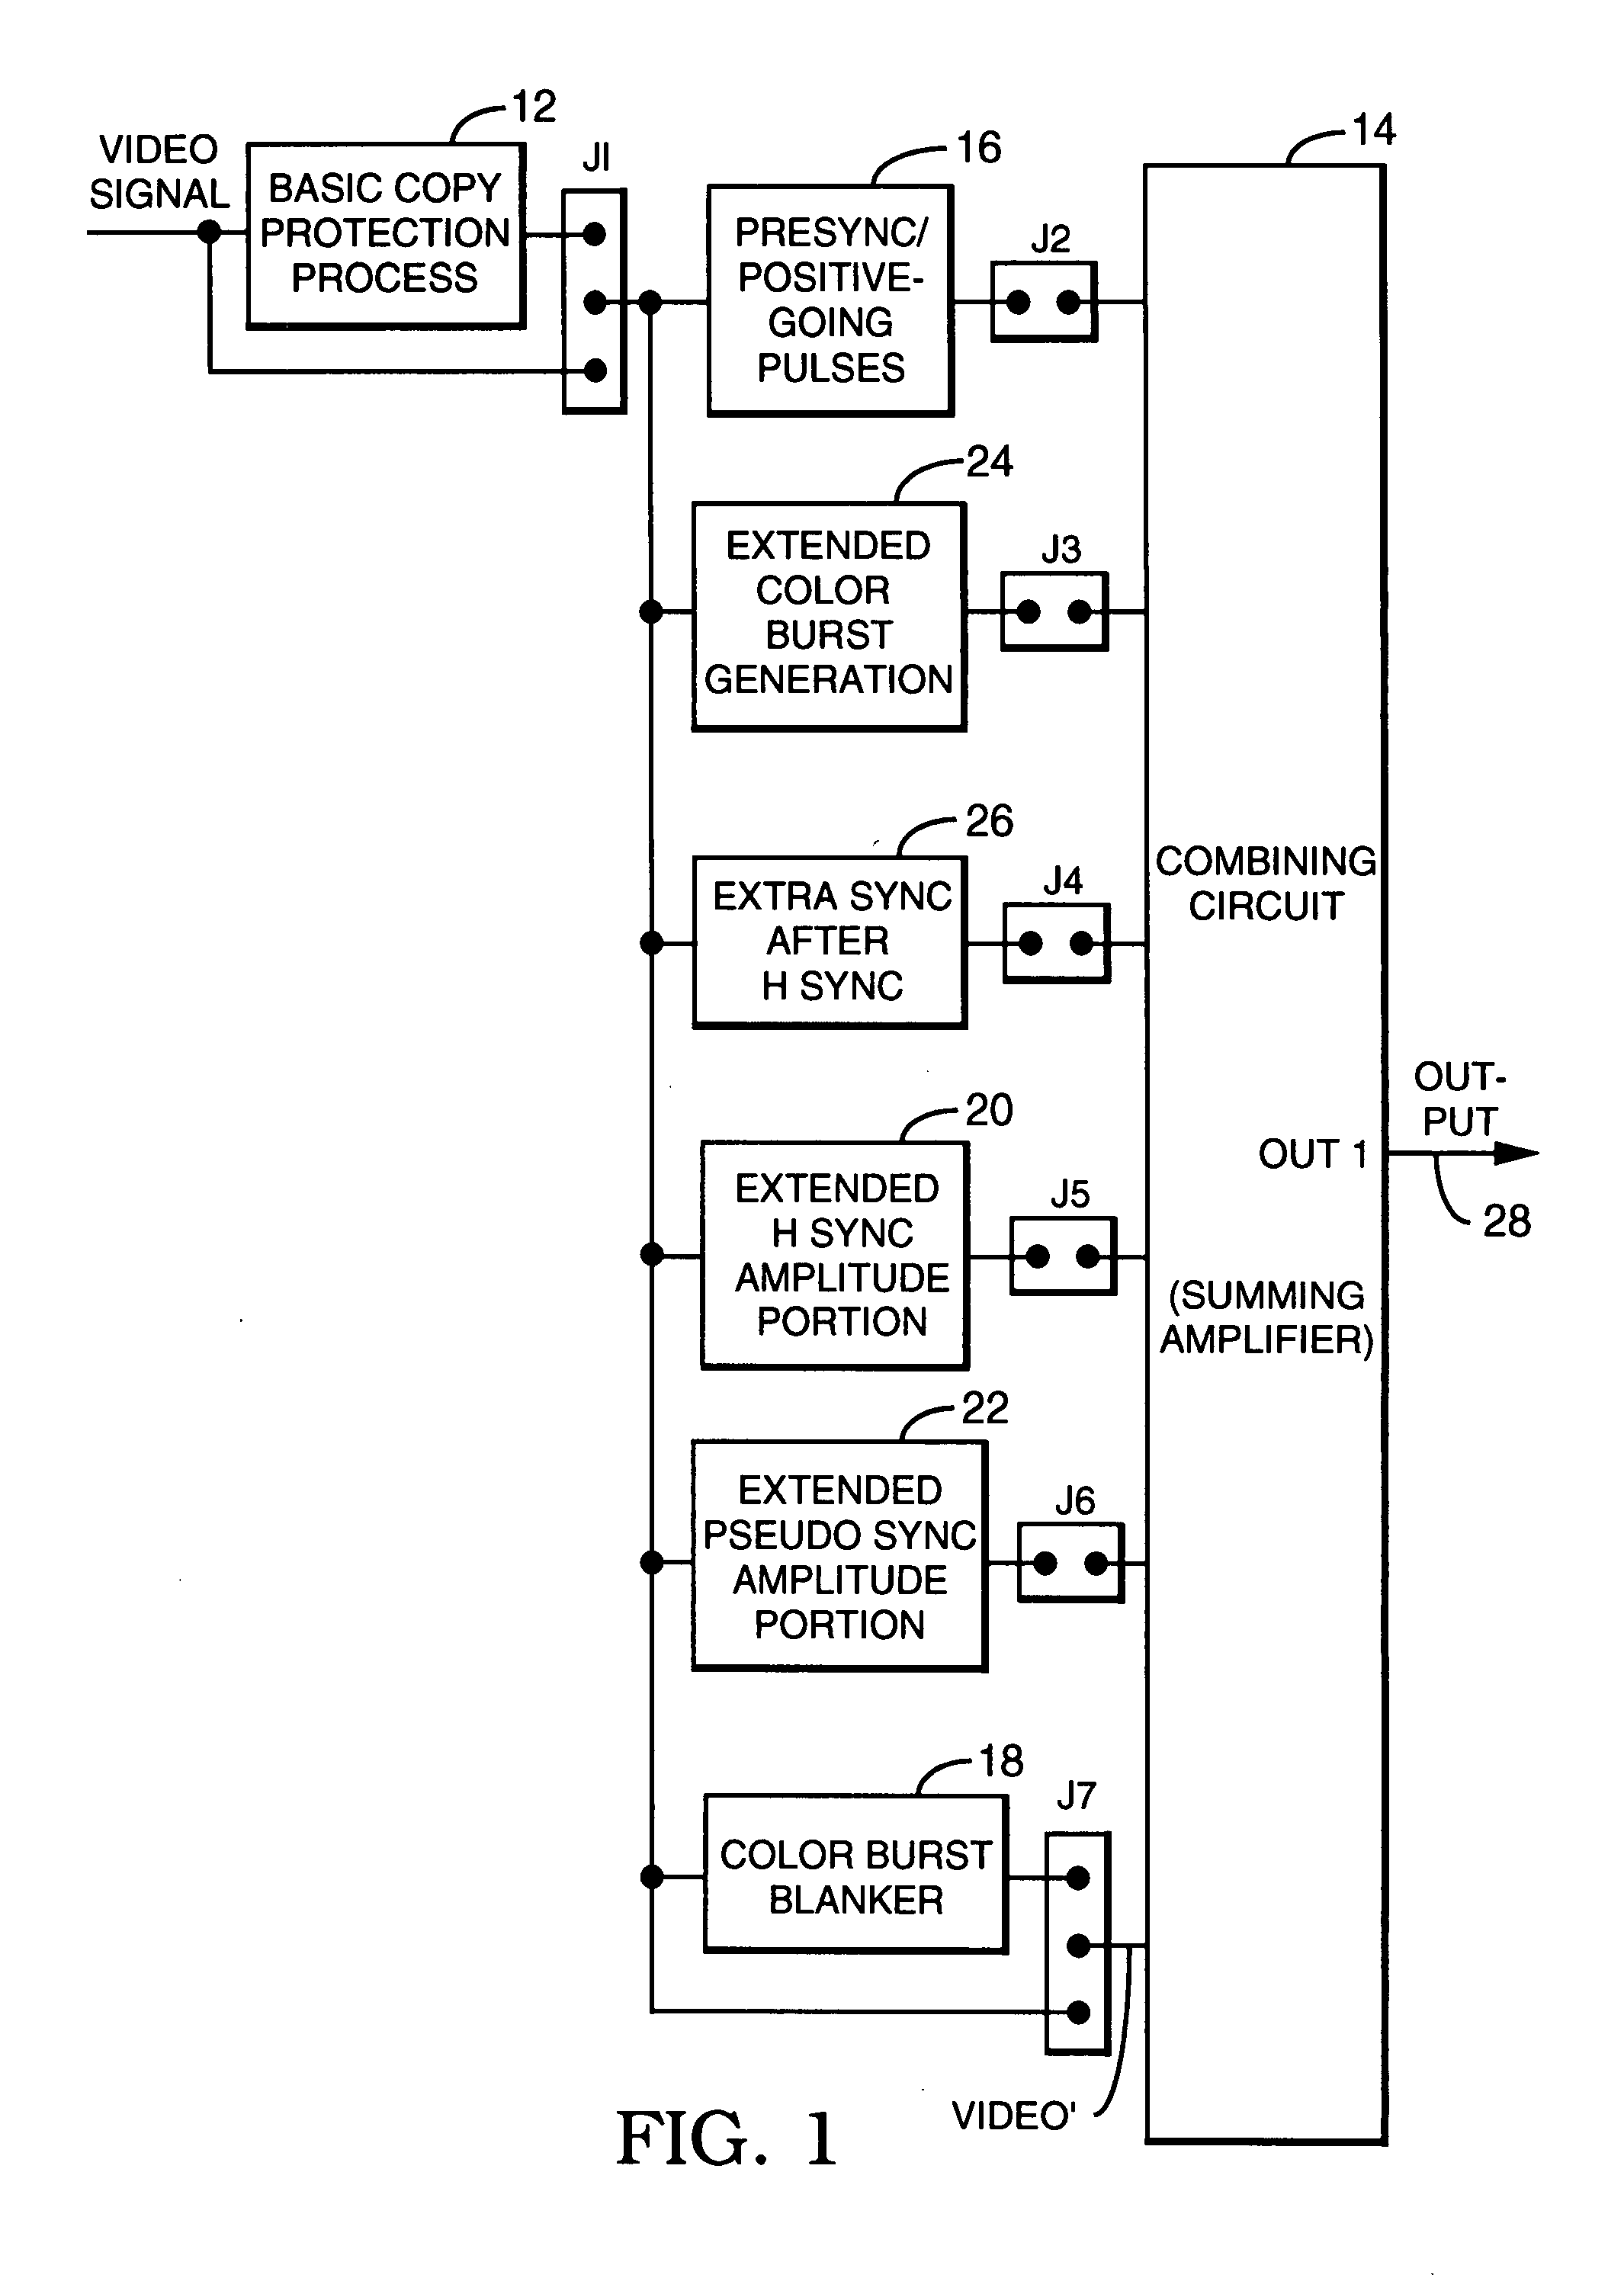 Method and apparatus for modifying a video signal or for providing a copy protection signal by adding selected negative going and positive going pulses